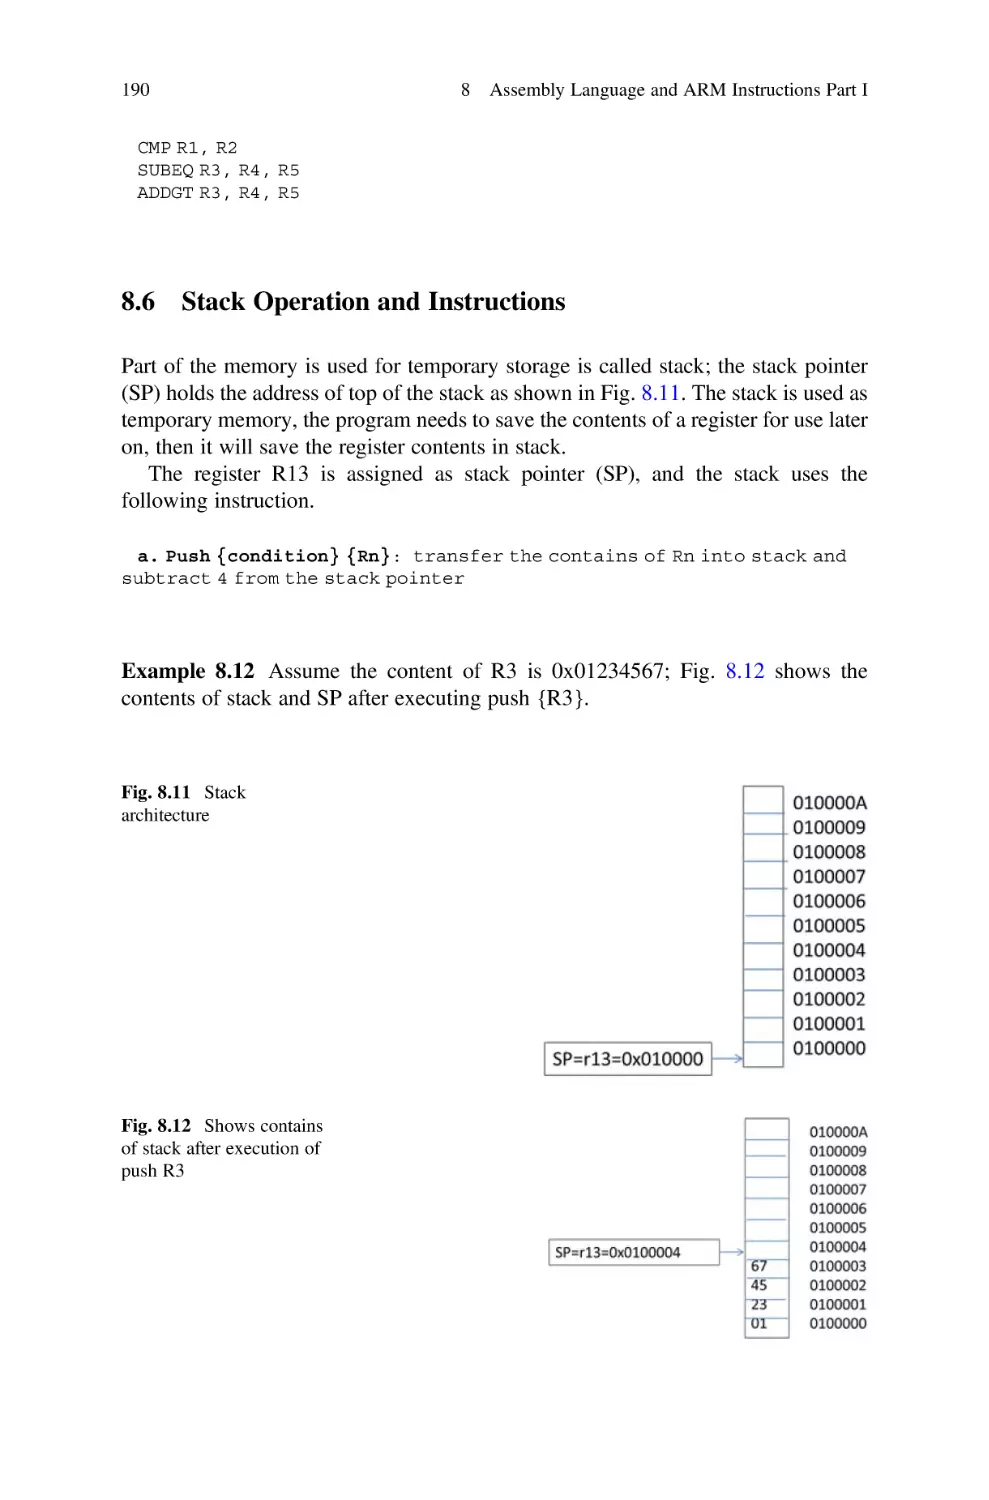 8.6 Stack Operation and Instructions